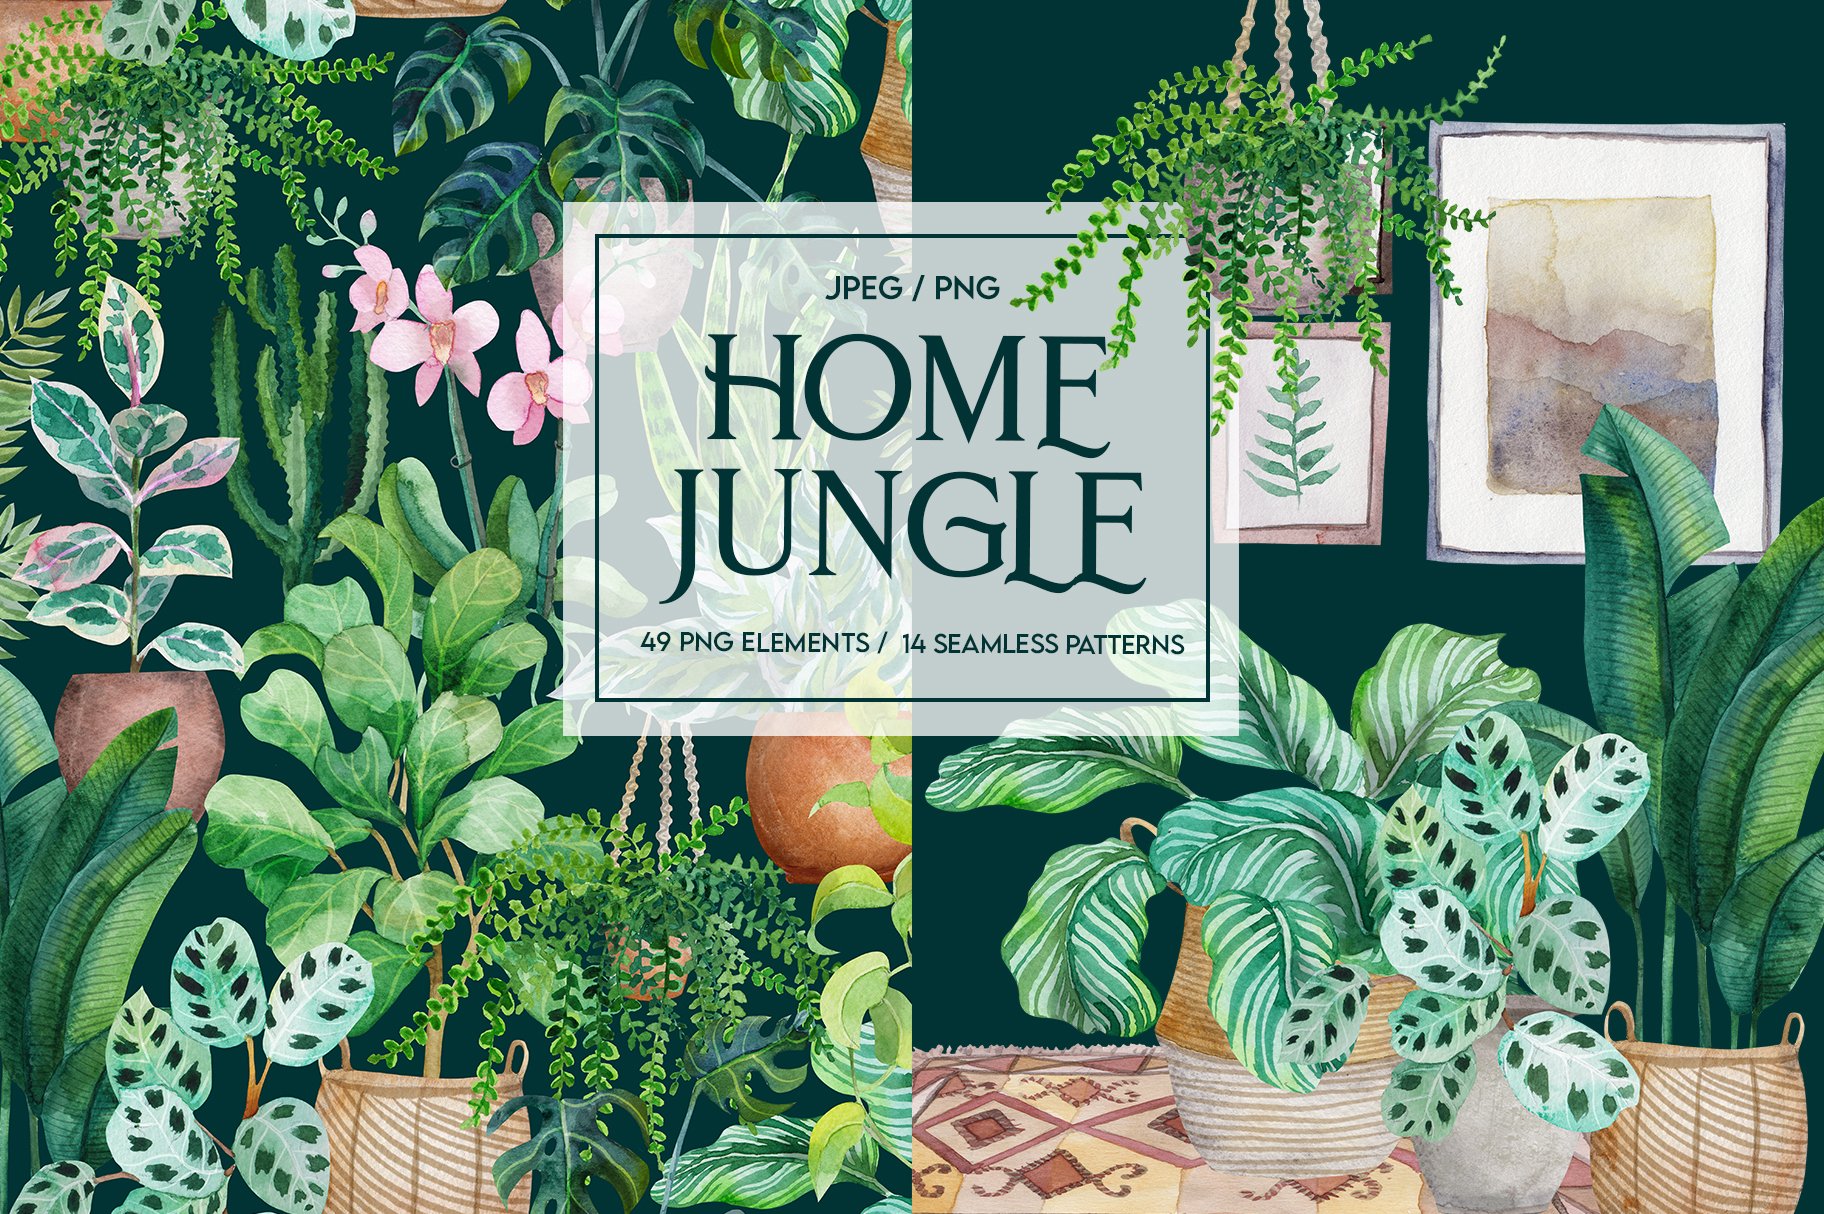 Home jungle cover image.